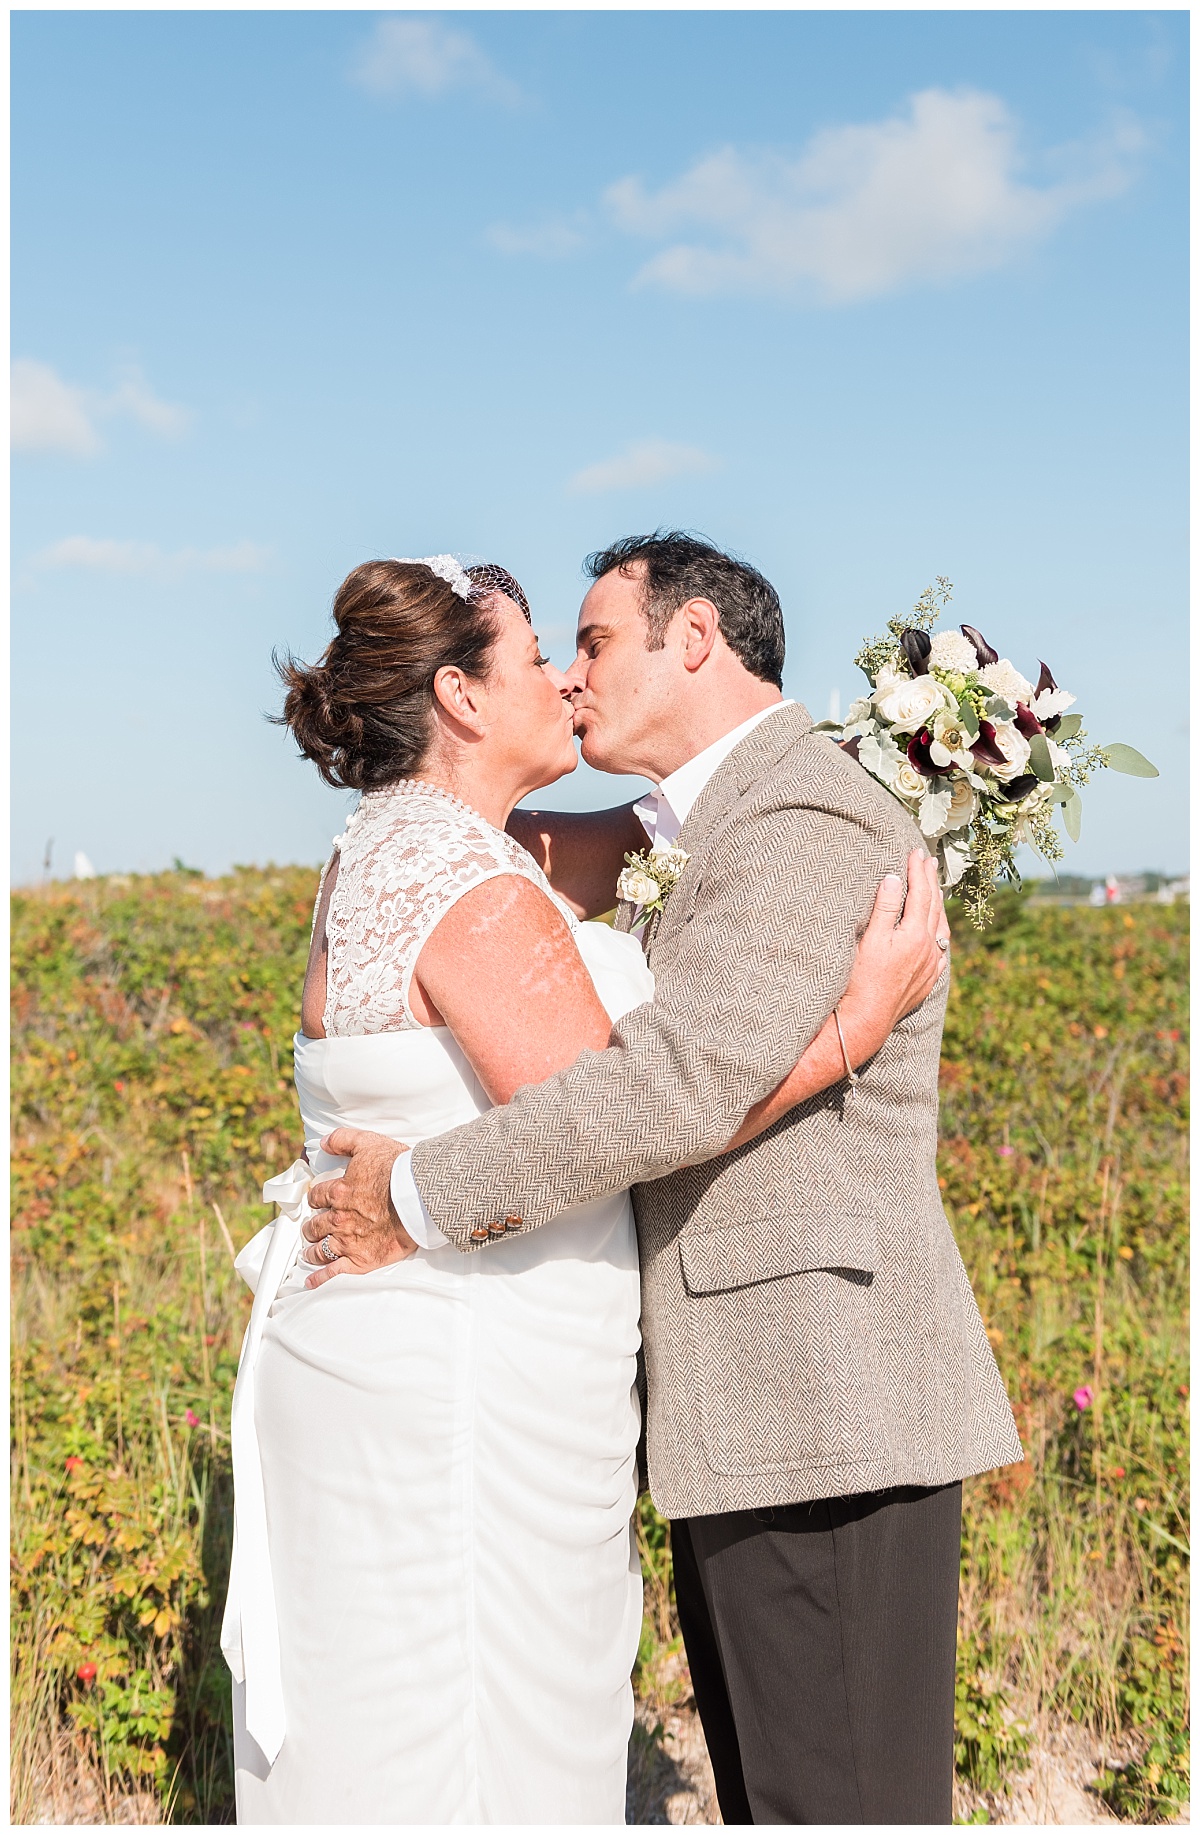 A Beautiful Intimate Elopement at the Nantucket Brant Point Lighthouse